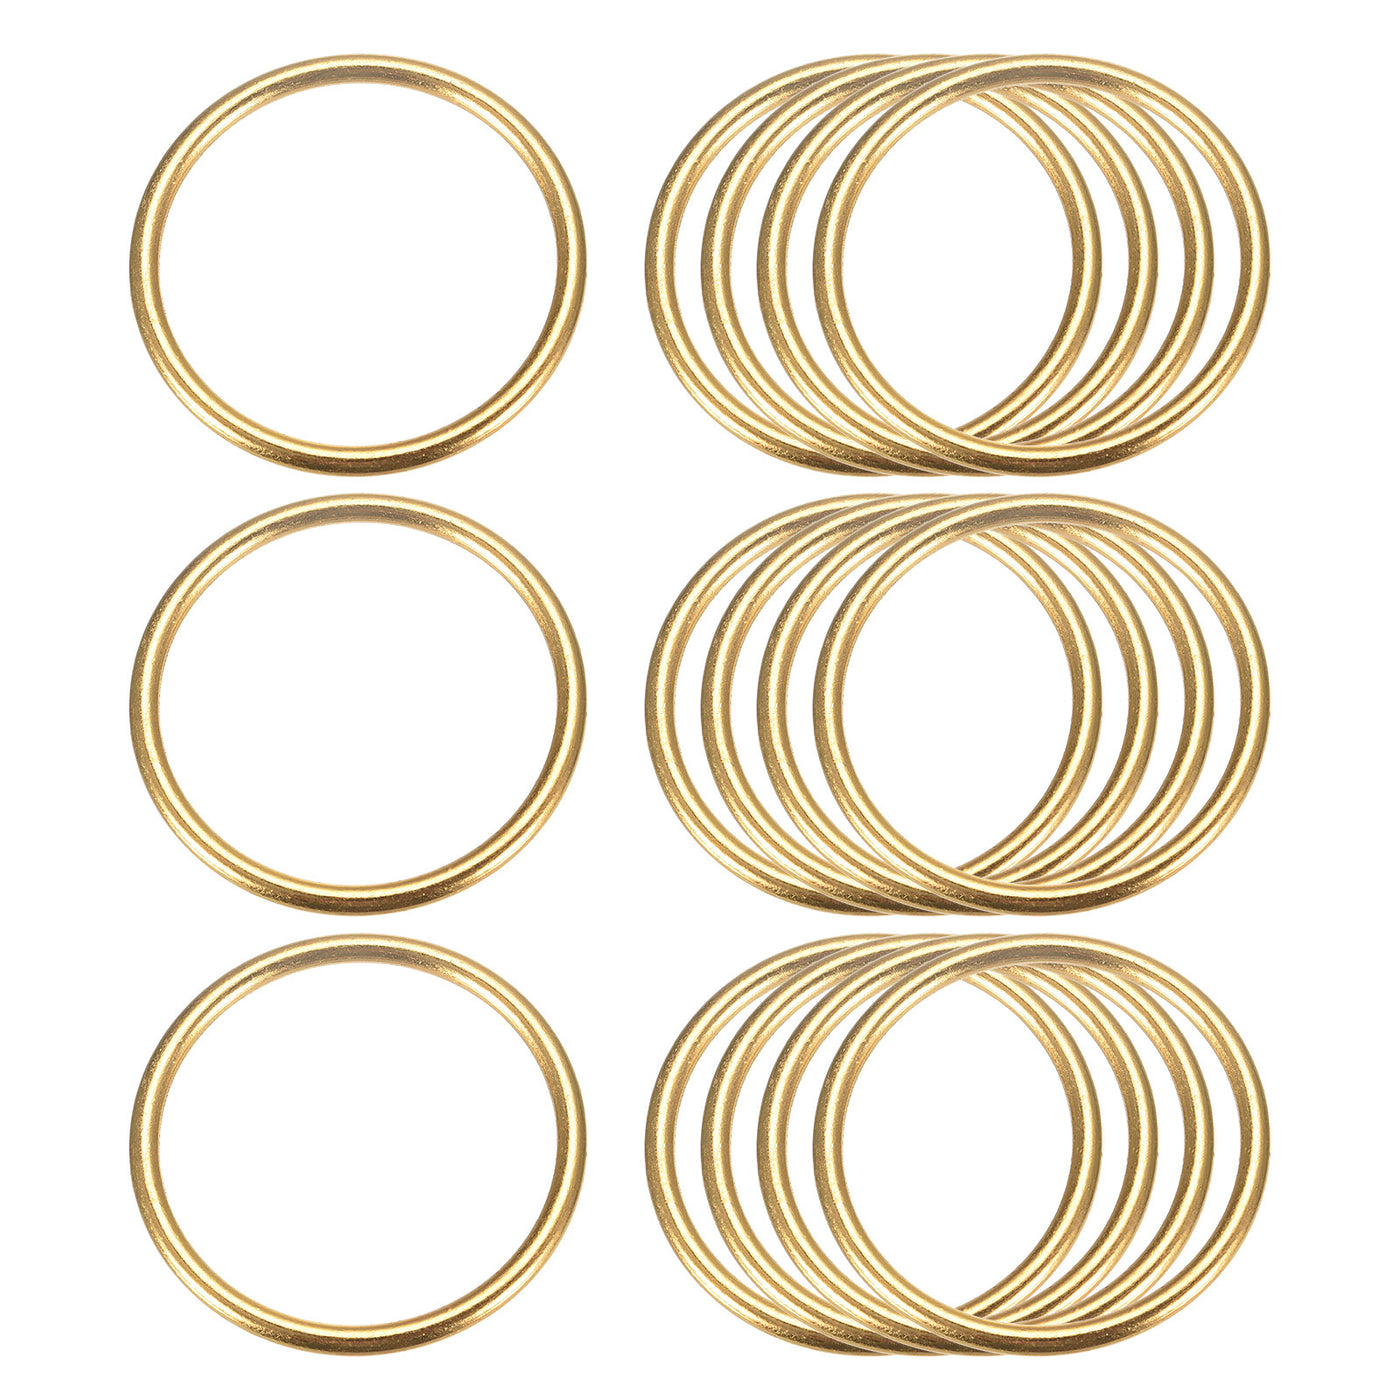 uxcell Uxcell Metal O Rings, 15pcs 40mm(1.57") ID 3mm Thick Welded O-Ringe, Gold Tone